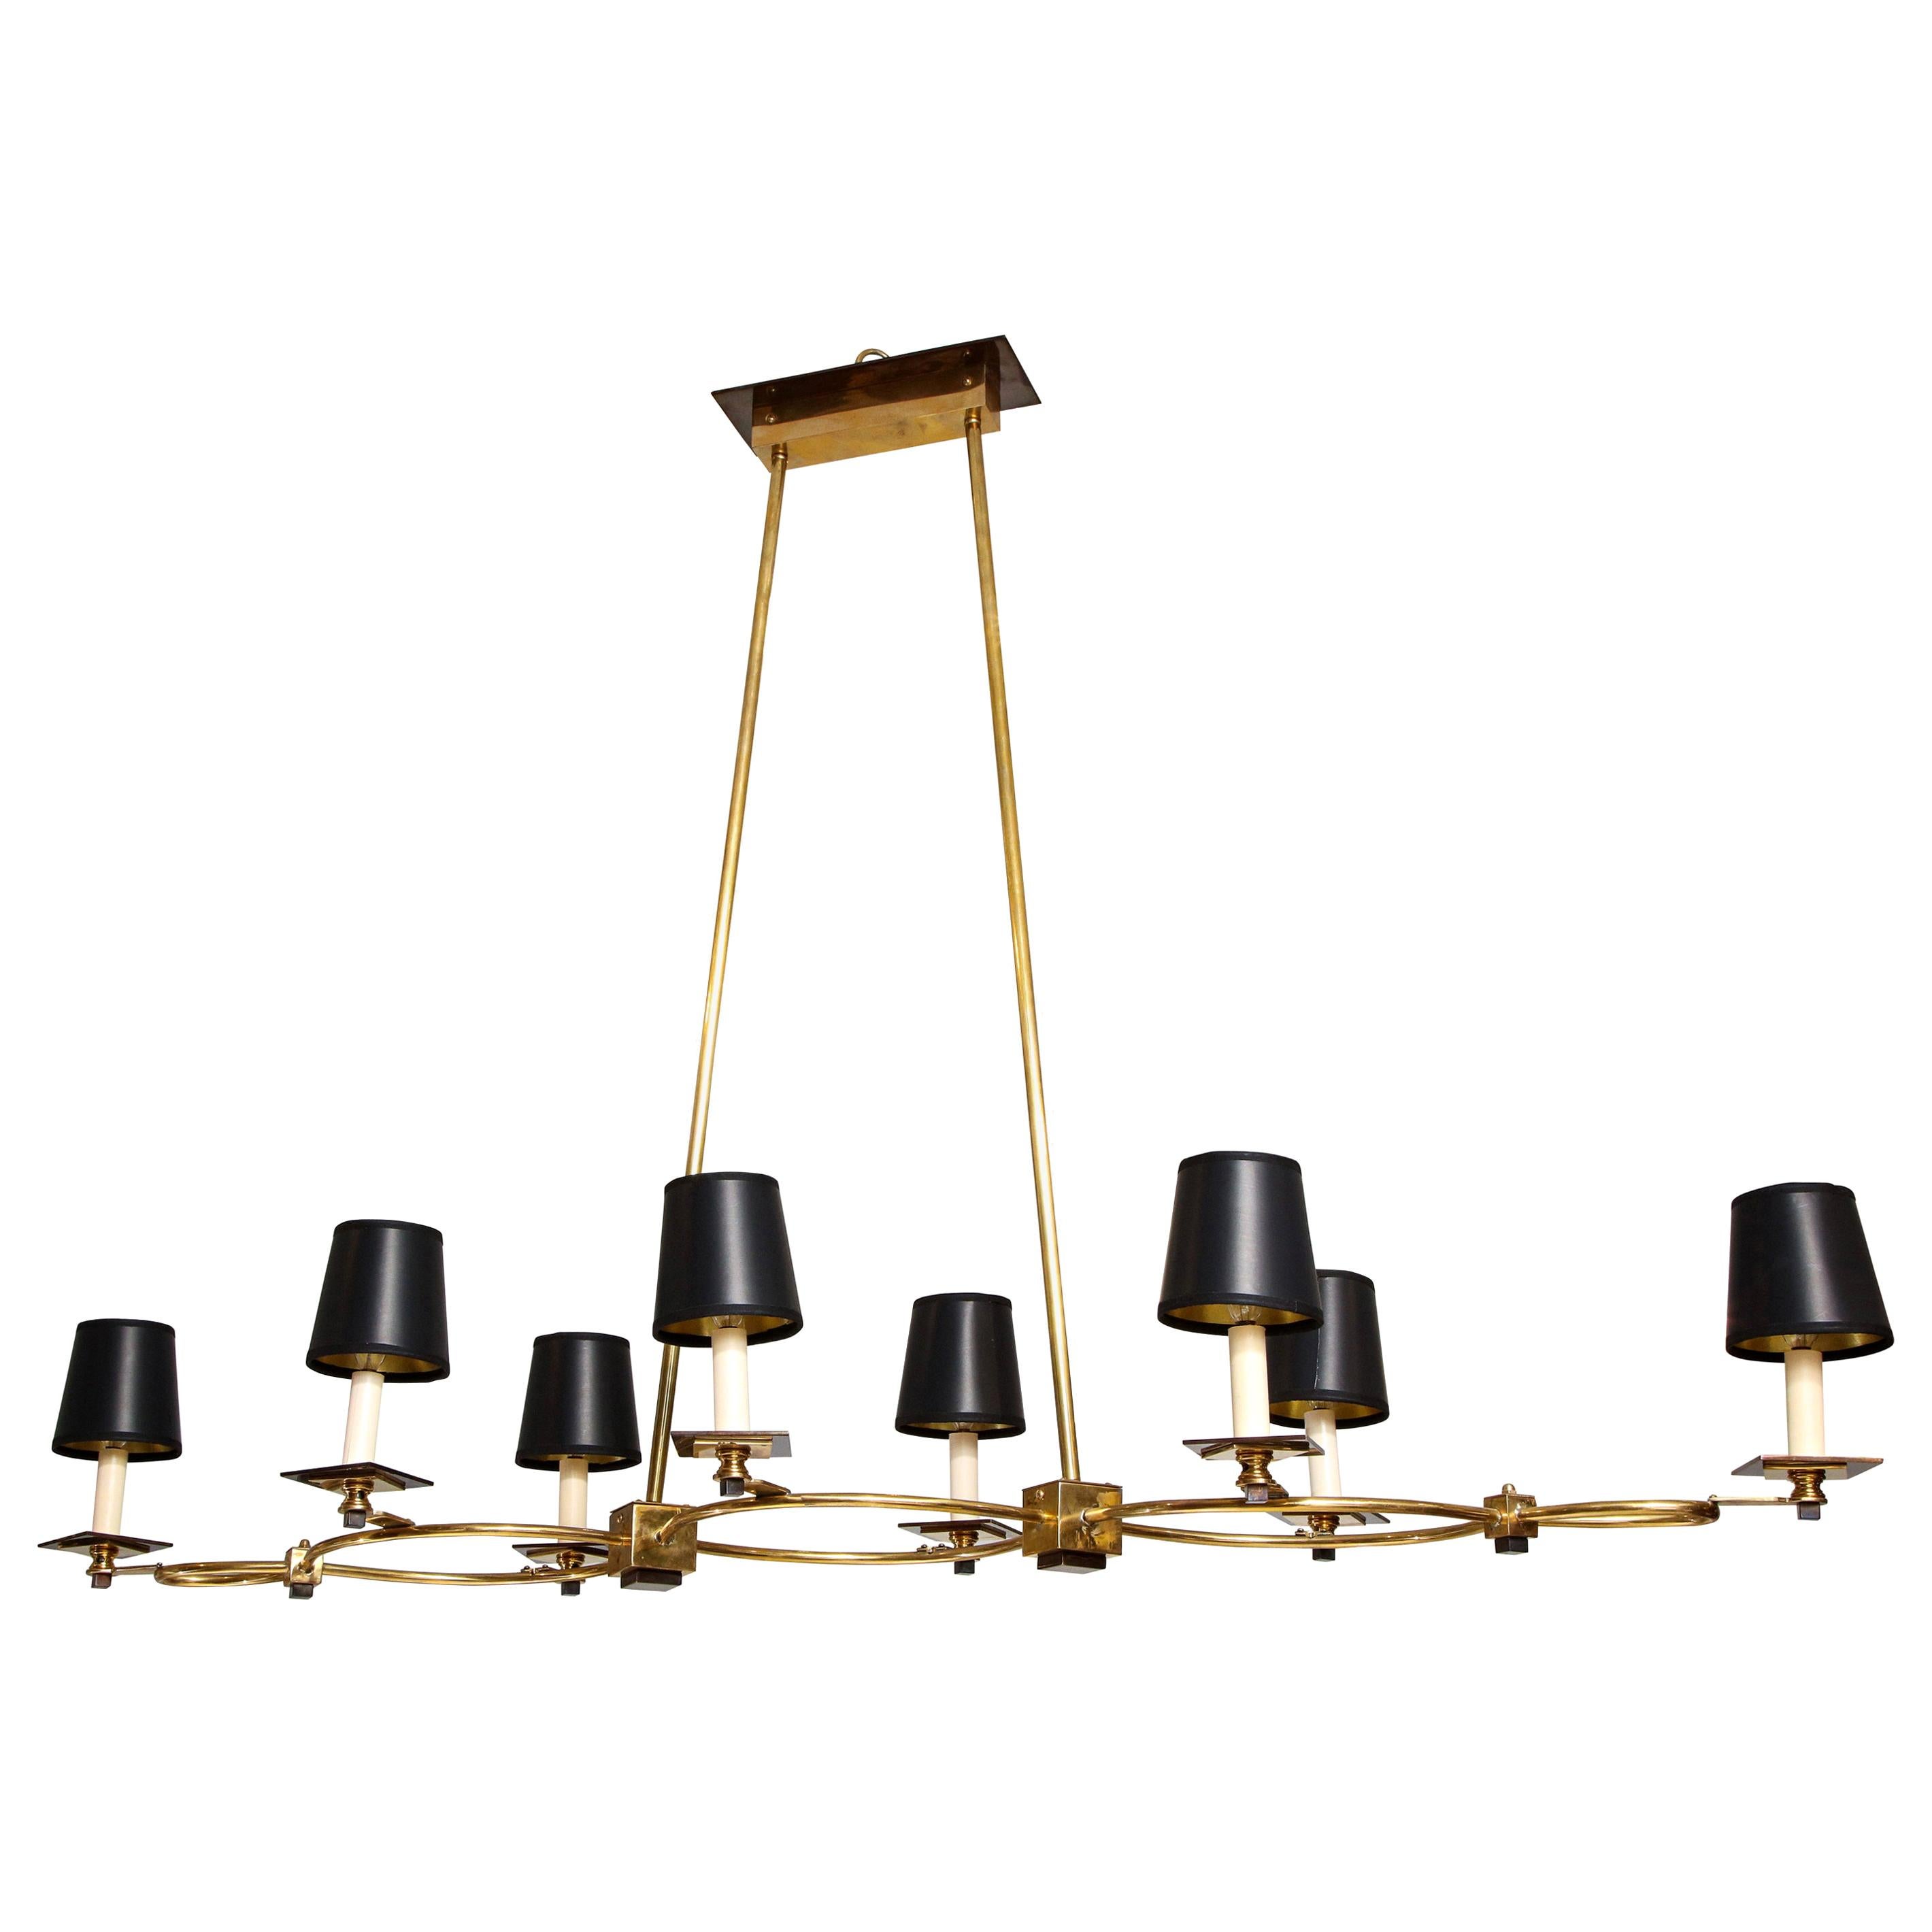 Custom Midcentury-Style Brass and Bronze Eight-Arm Fixture For Sale